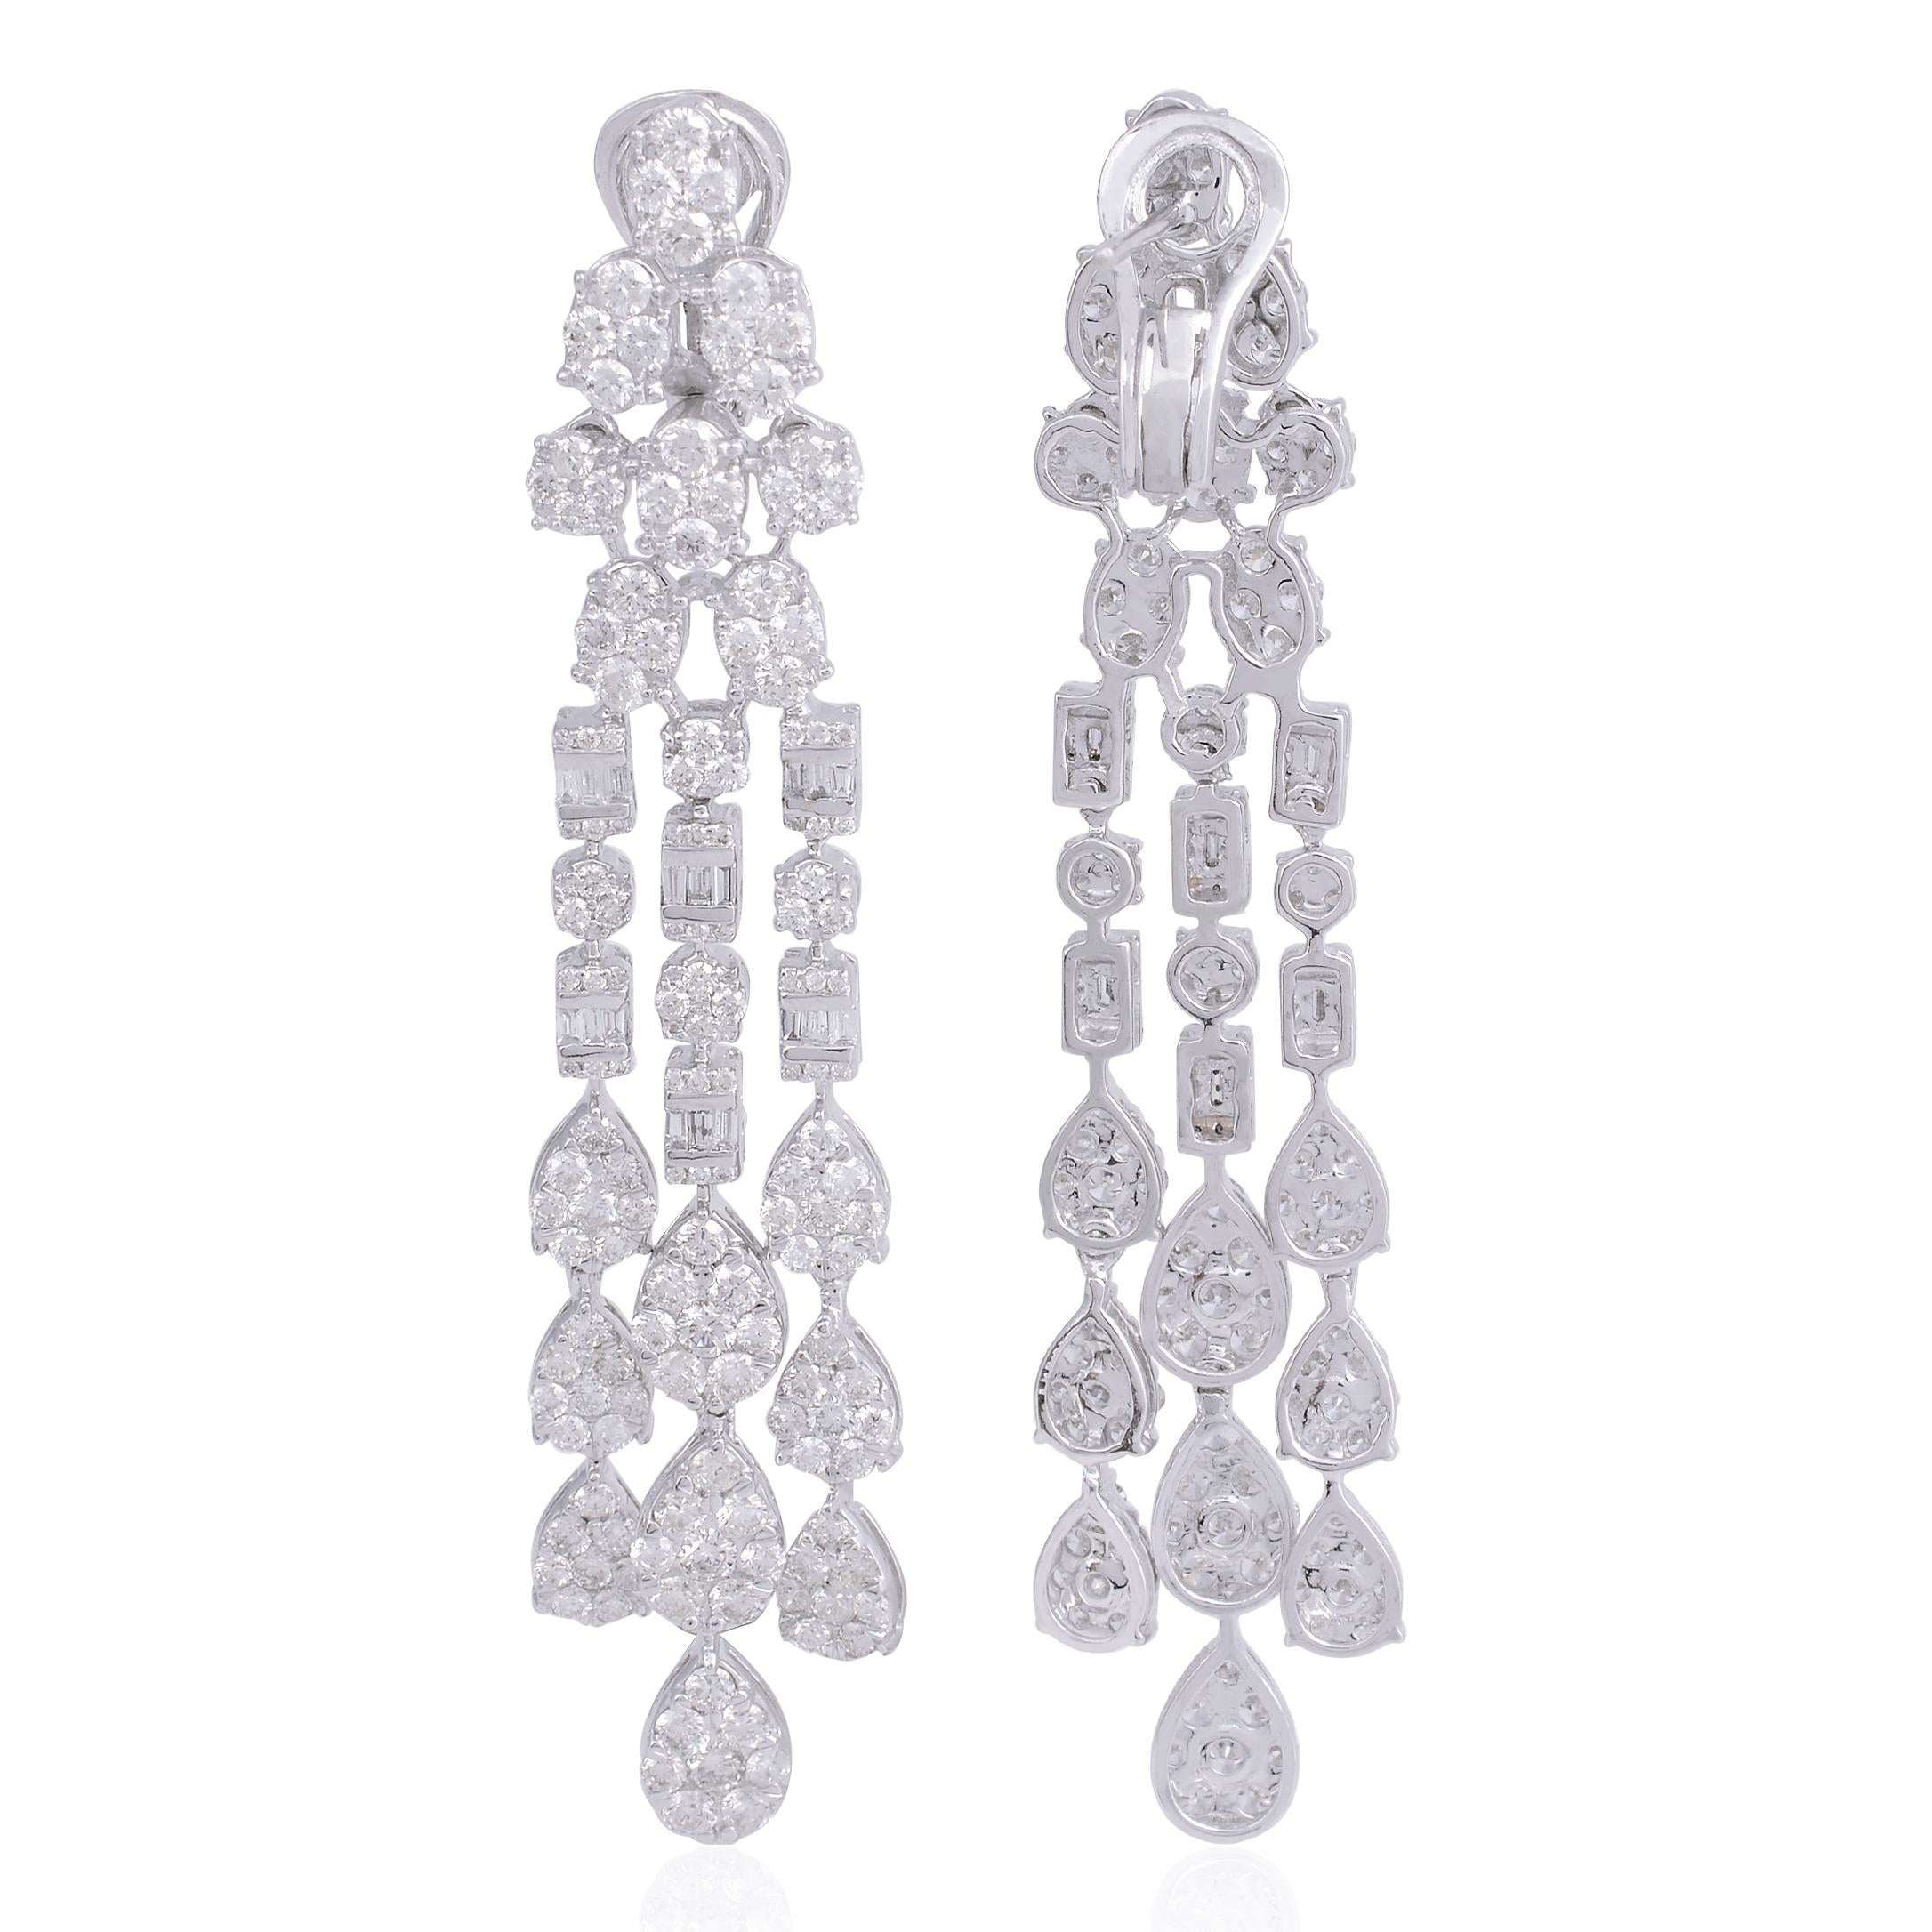 Item Code :- CN-31457
Gross Wt. :- 18.10 gm
18k White Gold Wt. :- 16.48 gm
Natural Diamond Wt. :- 8.10 Ct. ( AVERAGE DIAMOND CLARITY SI1-SI2 & COLOR H-I )
Earrings Size :- 69.67 x 12.57 mm approx.

✦ Sizing
.....................
We can adjust most